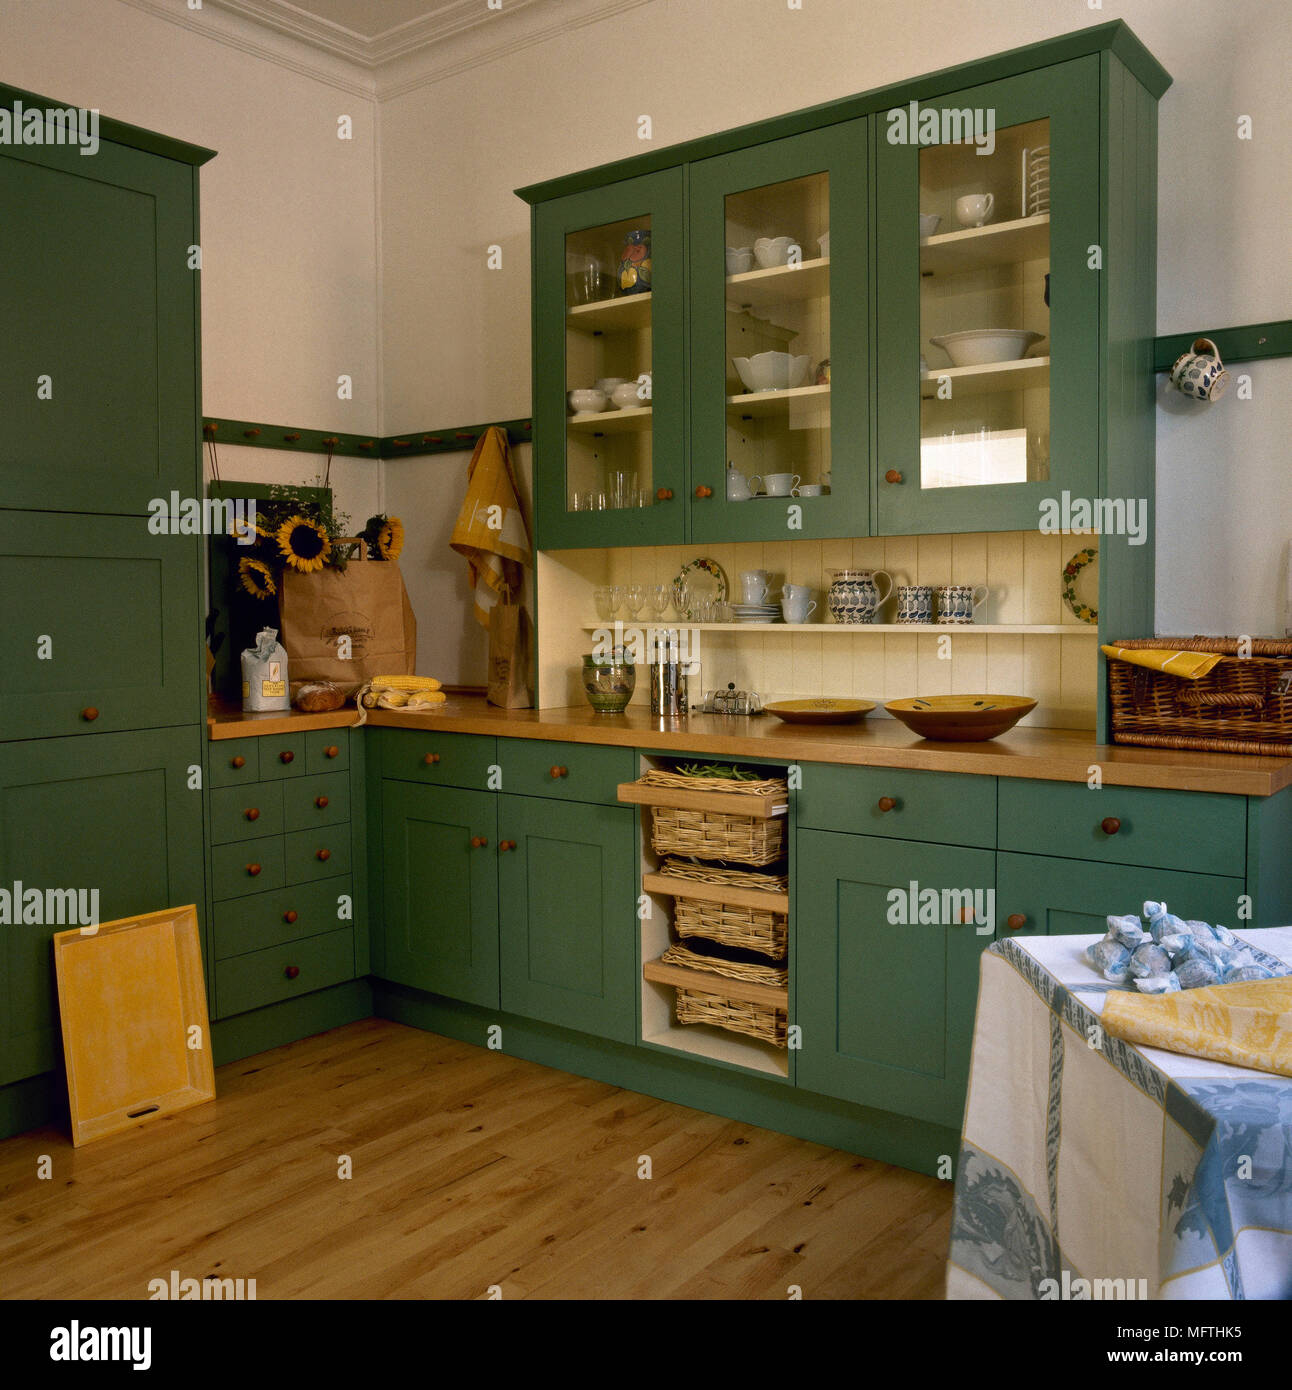 Modern, country style kitchen with green painted cabinets, wood countertops, and a wood floor. Stock Photo